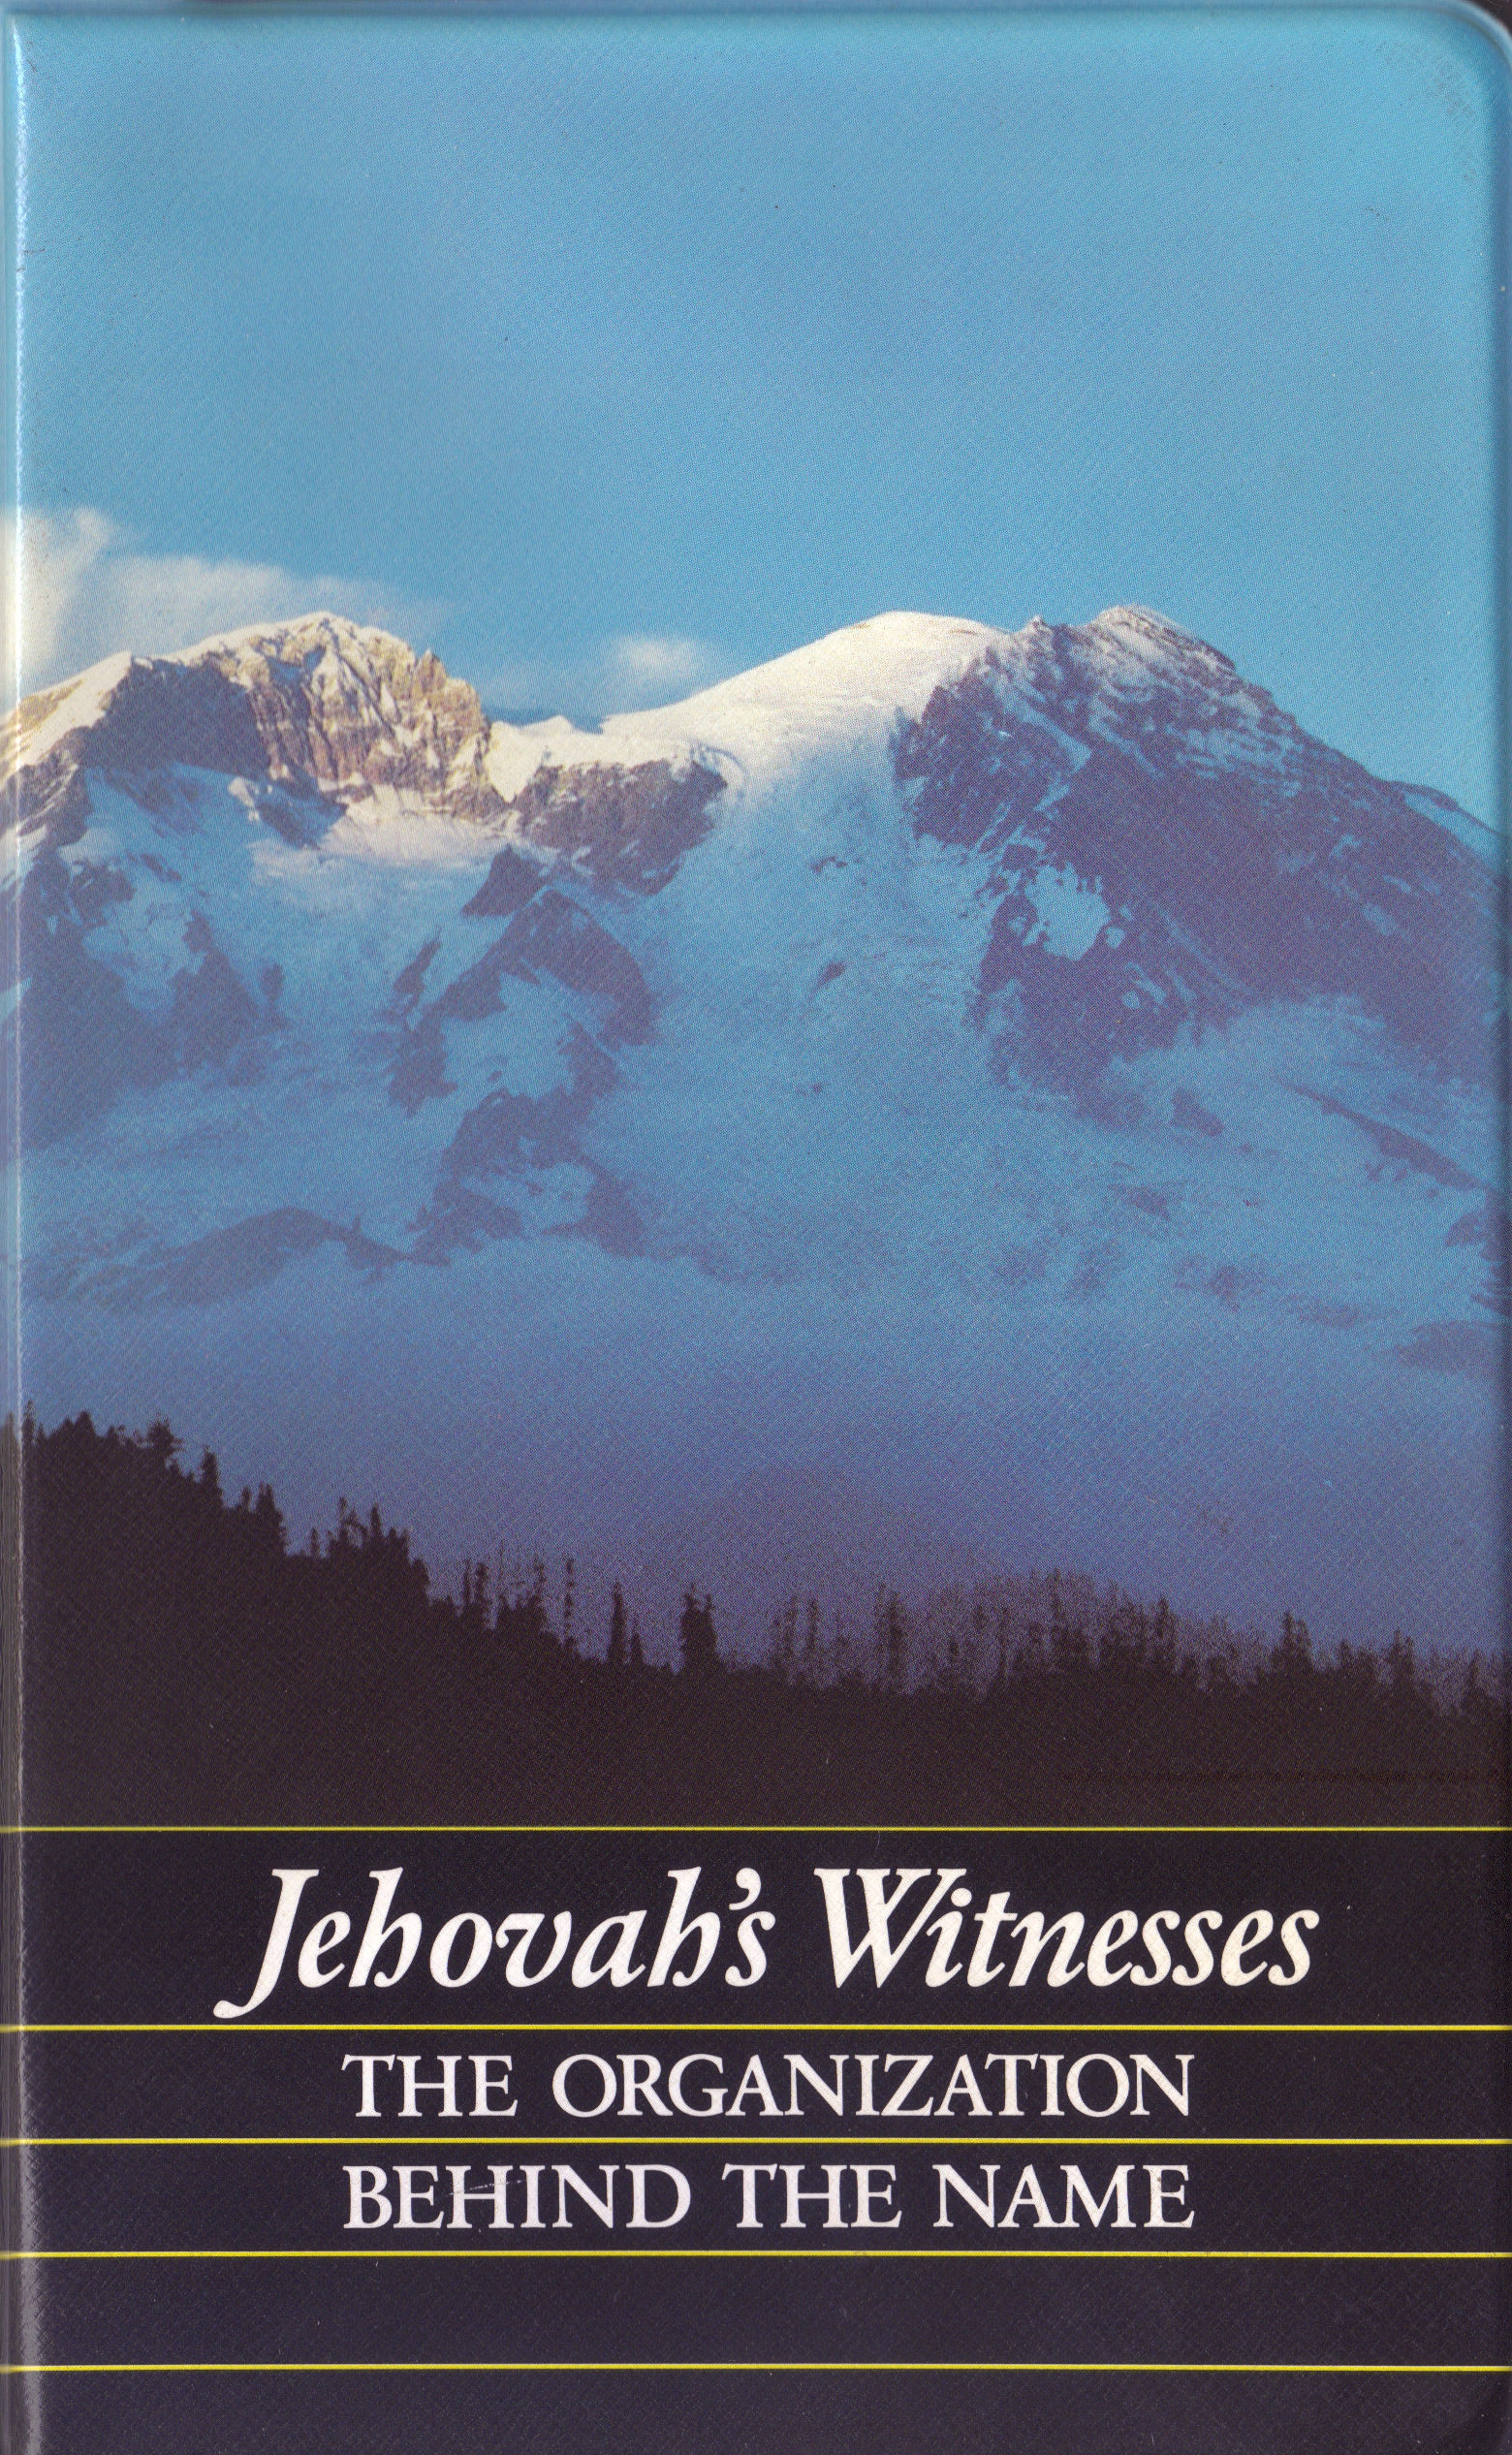 Jehovah's Witnesses: The Organization Behind the Name (1992) Screenshot 4